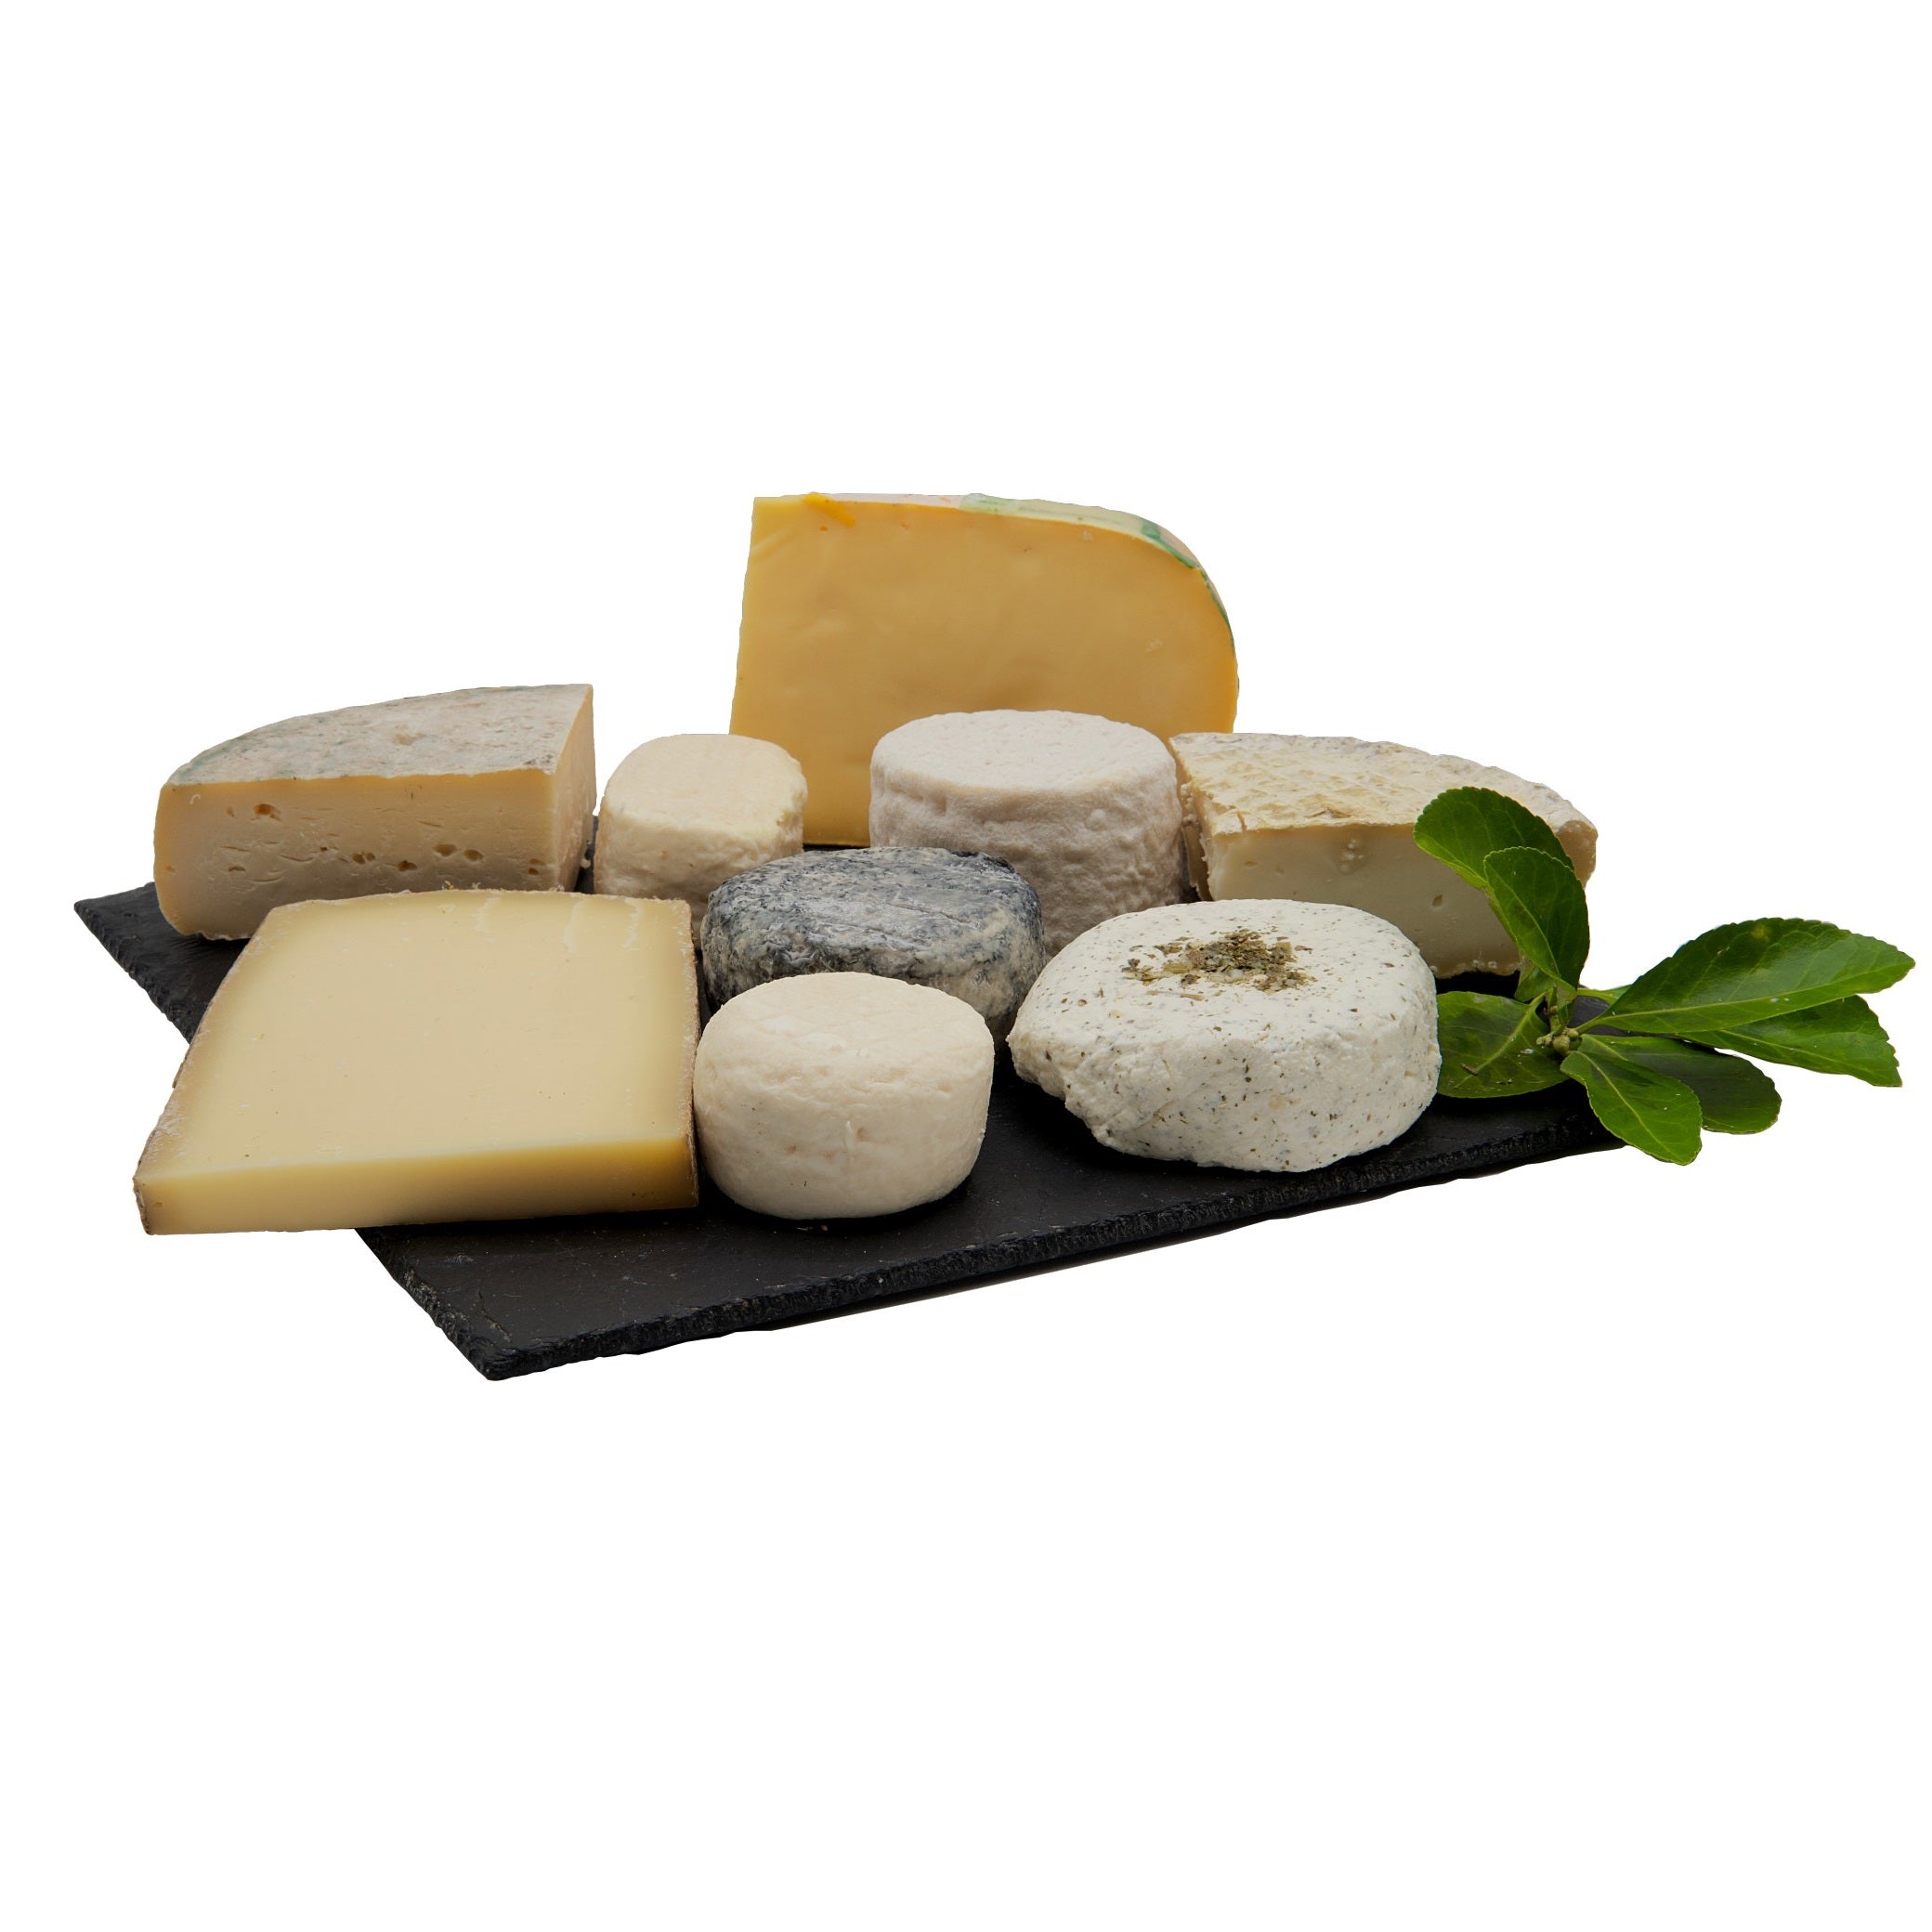 Cheese without added salt - pleasure basket 